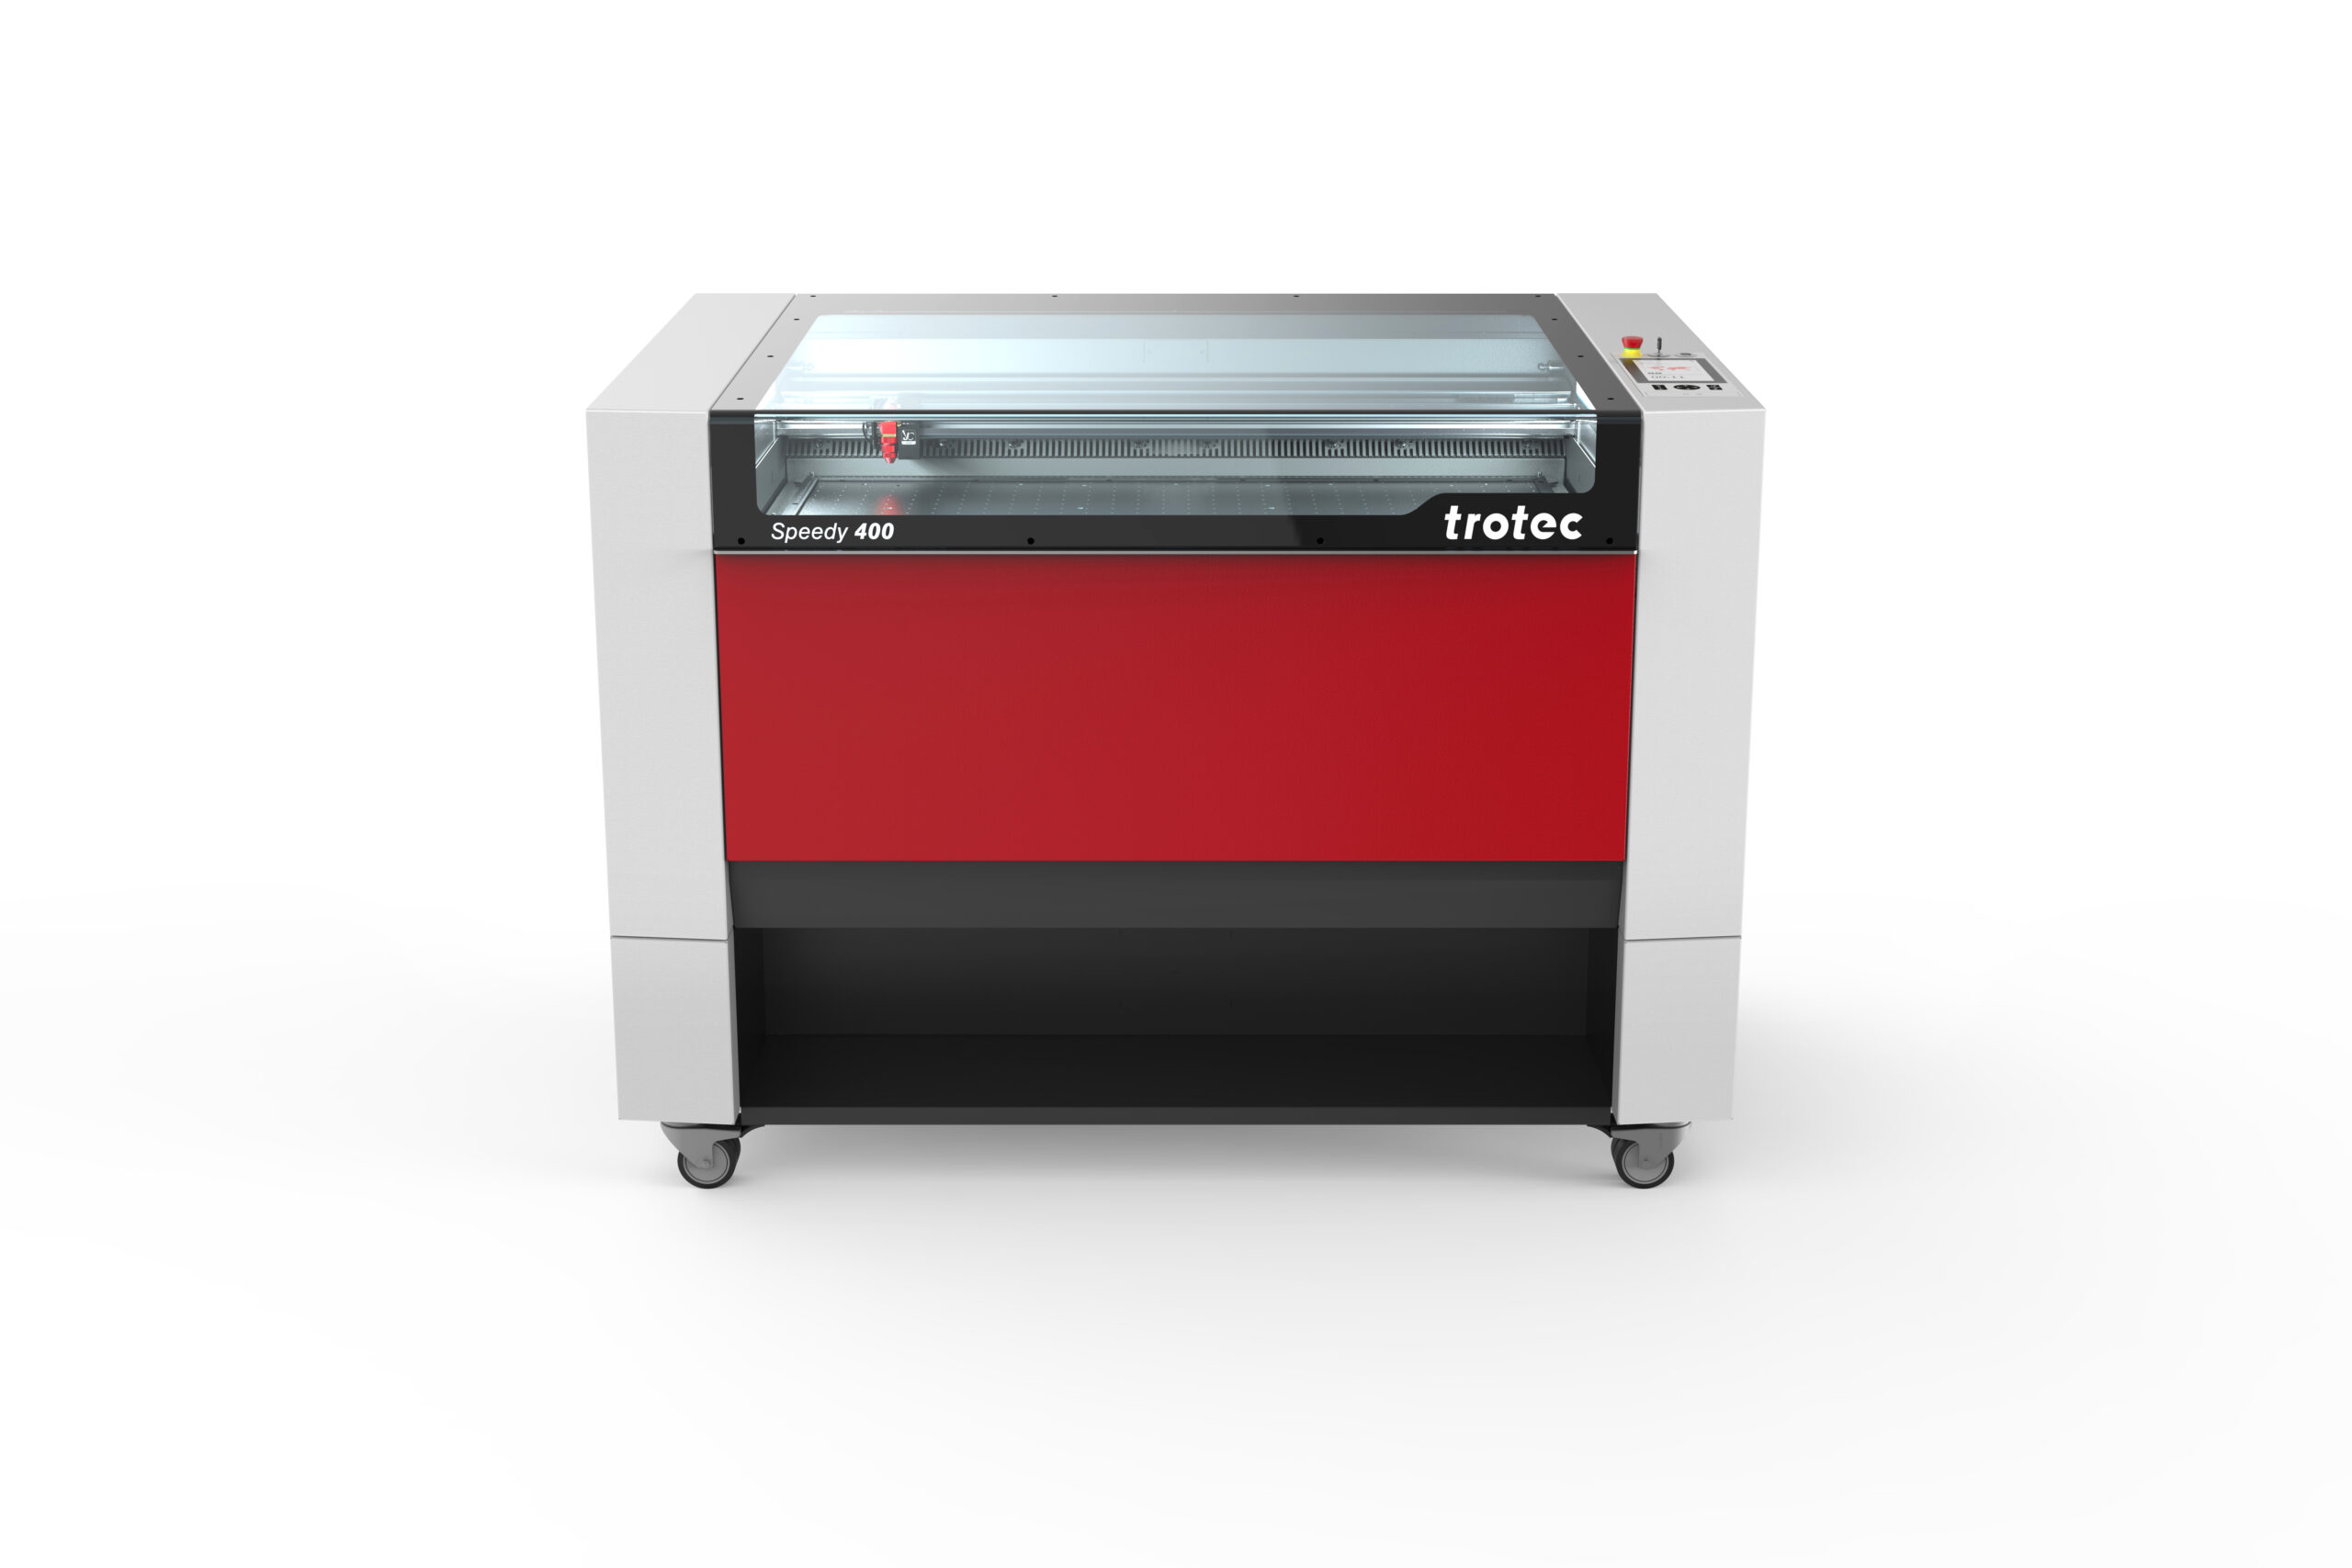 Trotec Speedy 400 Run On Ruby - the fastest CO2 engraving and cutting laser